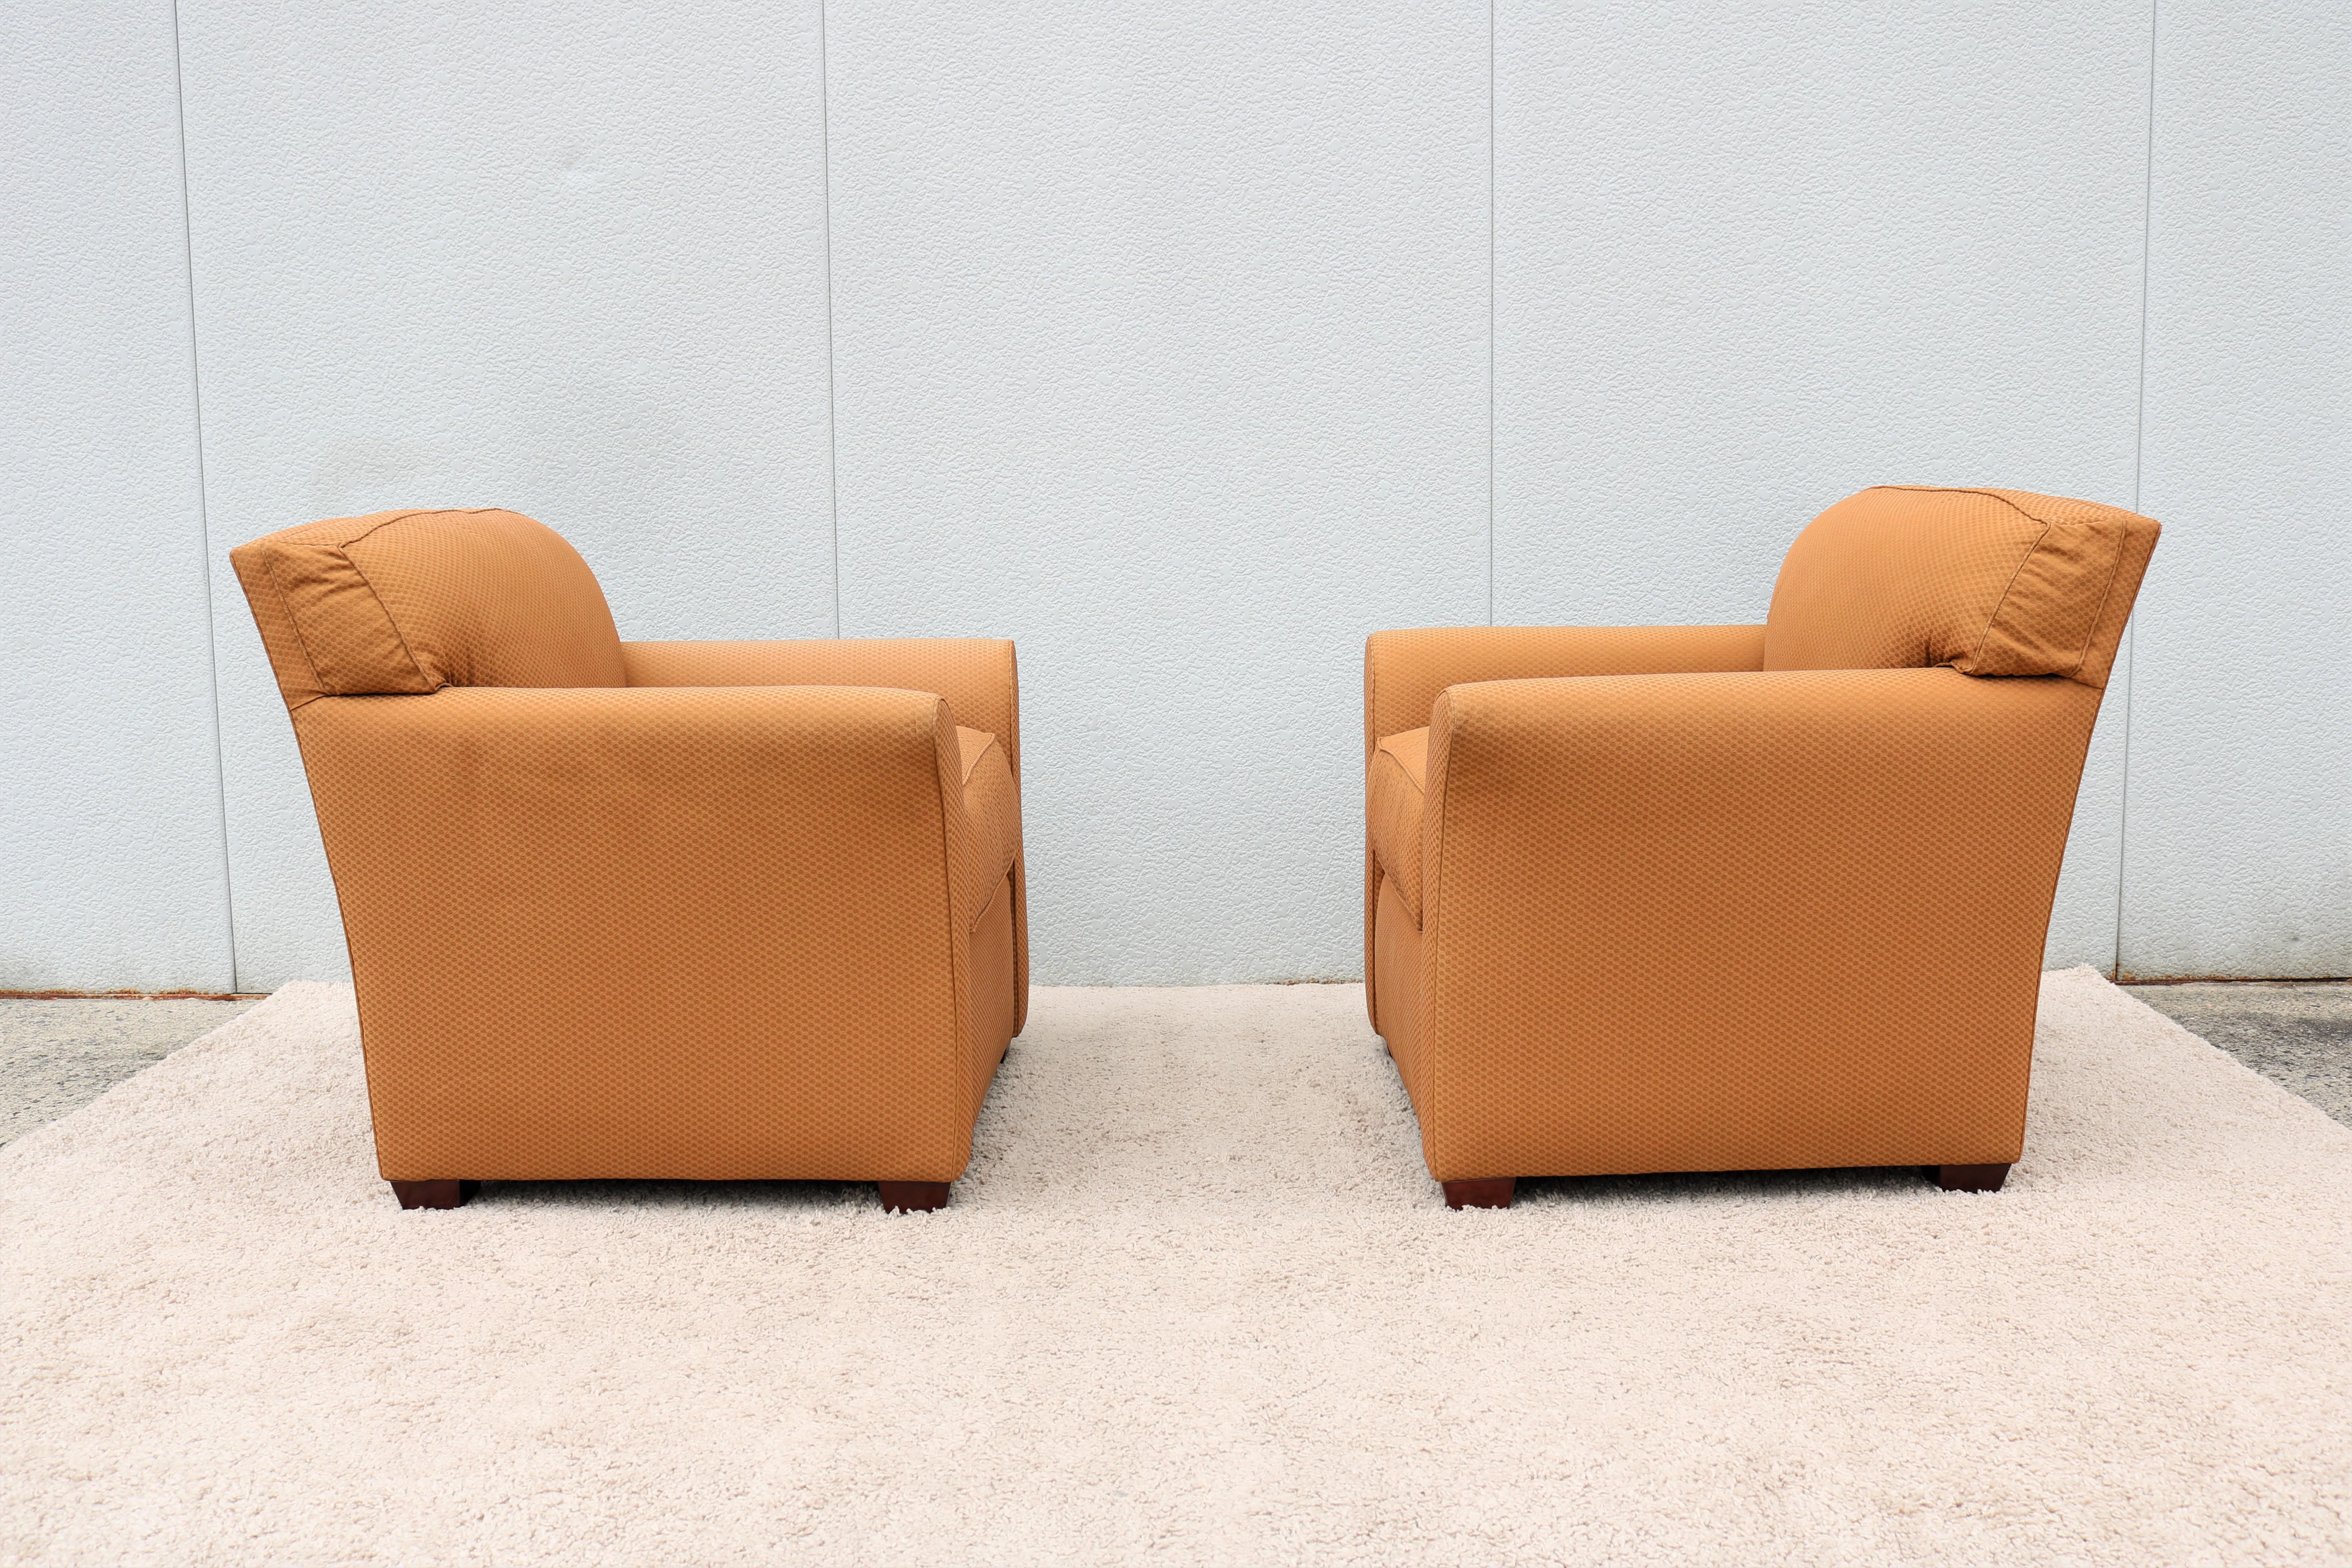 20th Century Bernhardt Lawson American Casual Style Lounge Chairs Very Comfortable, a Pair